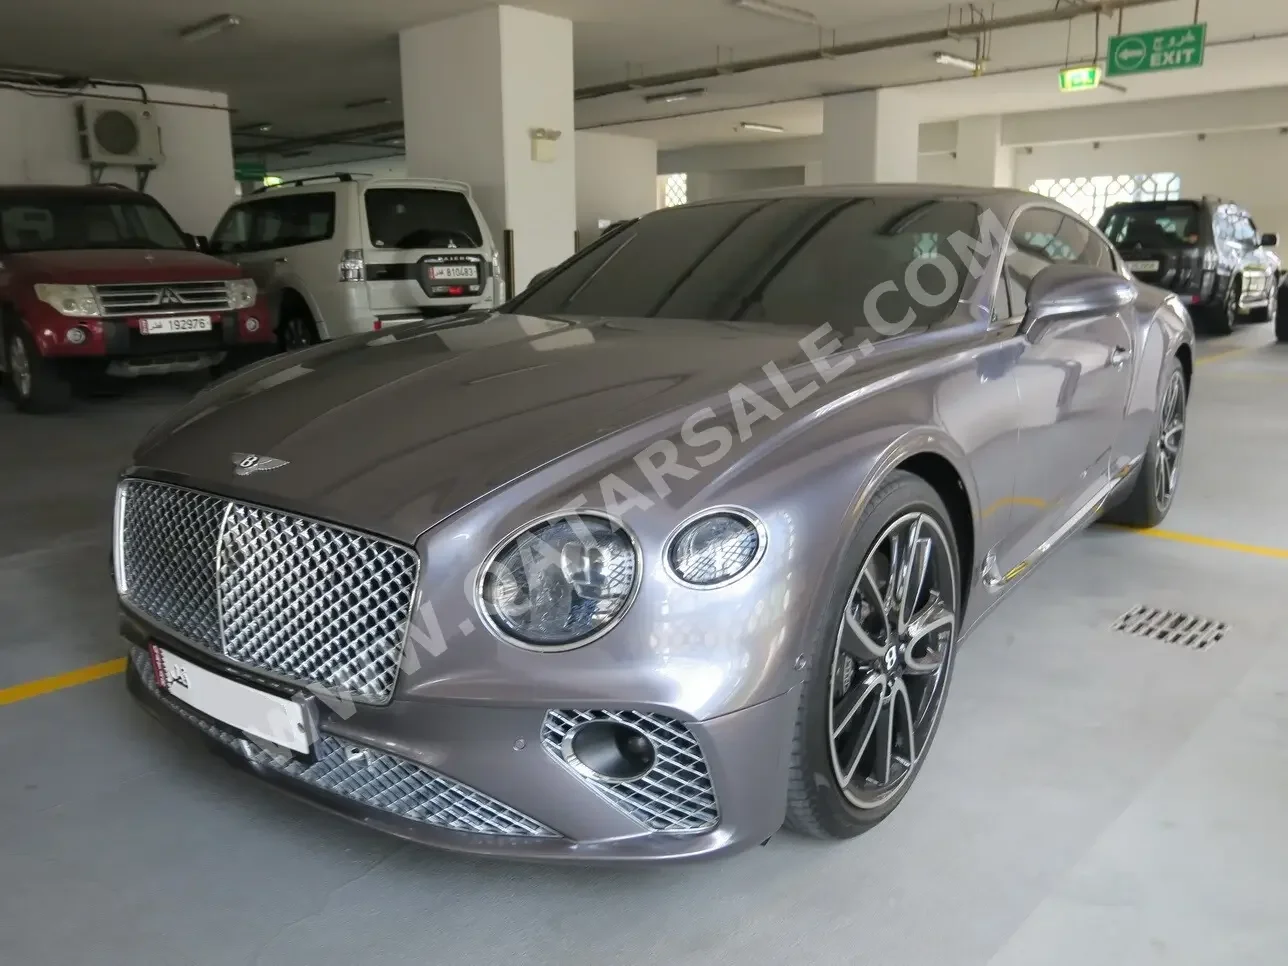 Bentley  Continental  2019  Automatic  47,000 Km  12 Cylinder  Rear Wheel Drive (RWD)  Coupe / Sport  Gray